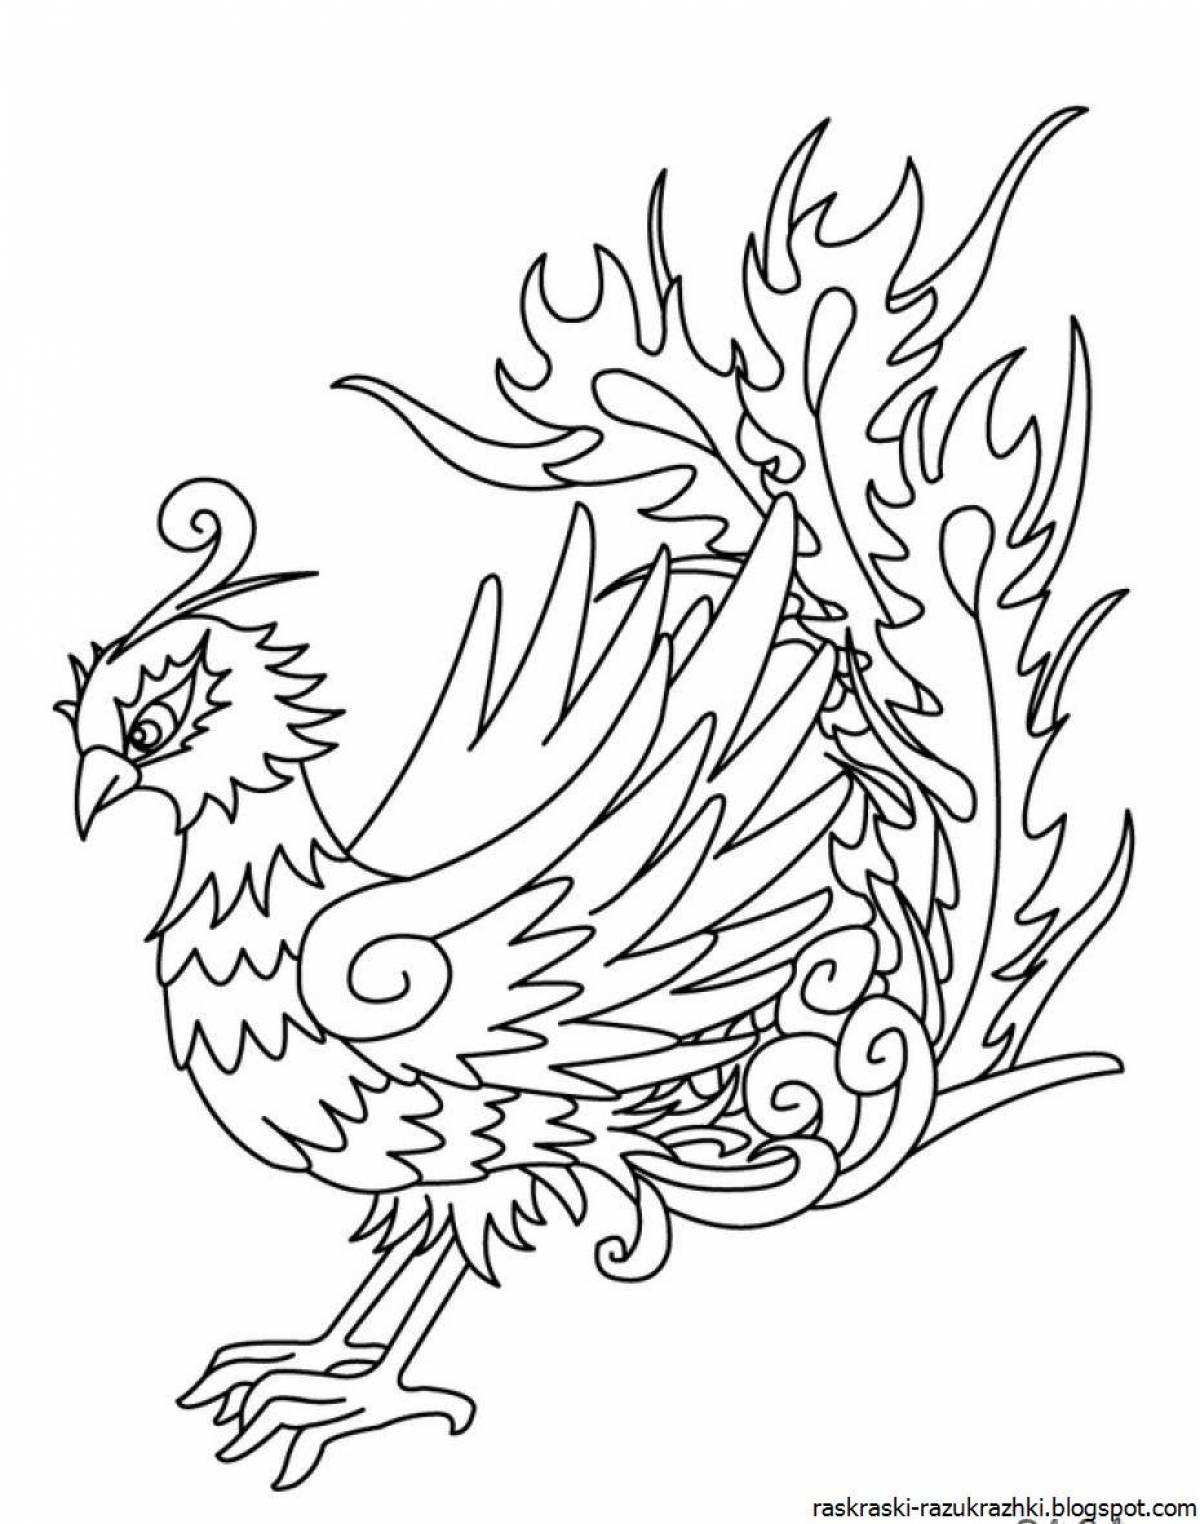 Coloring cute fire bird for kids